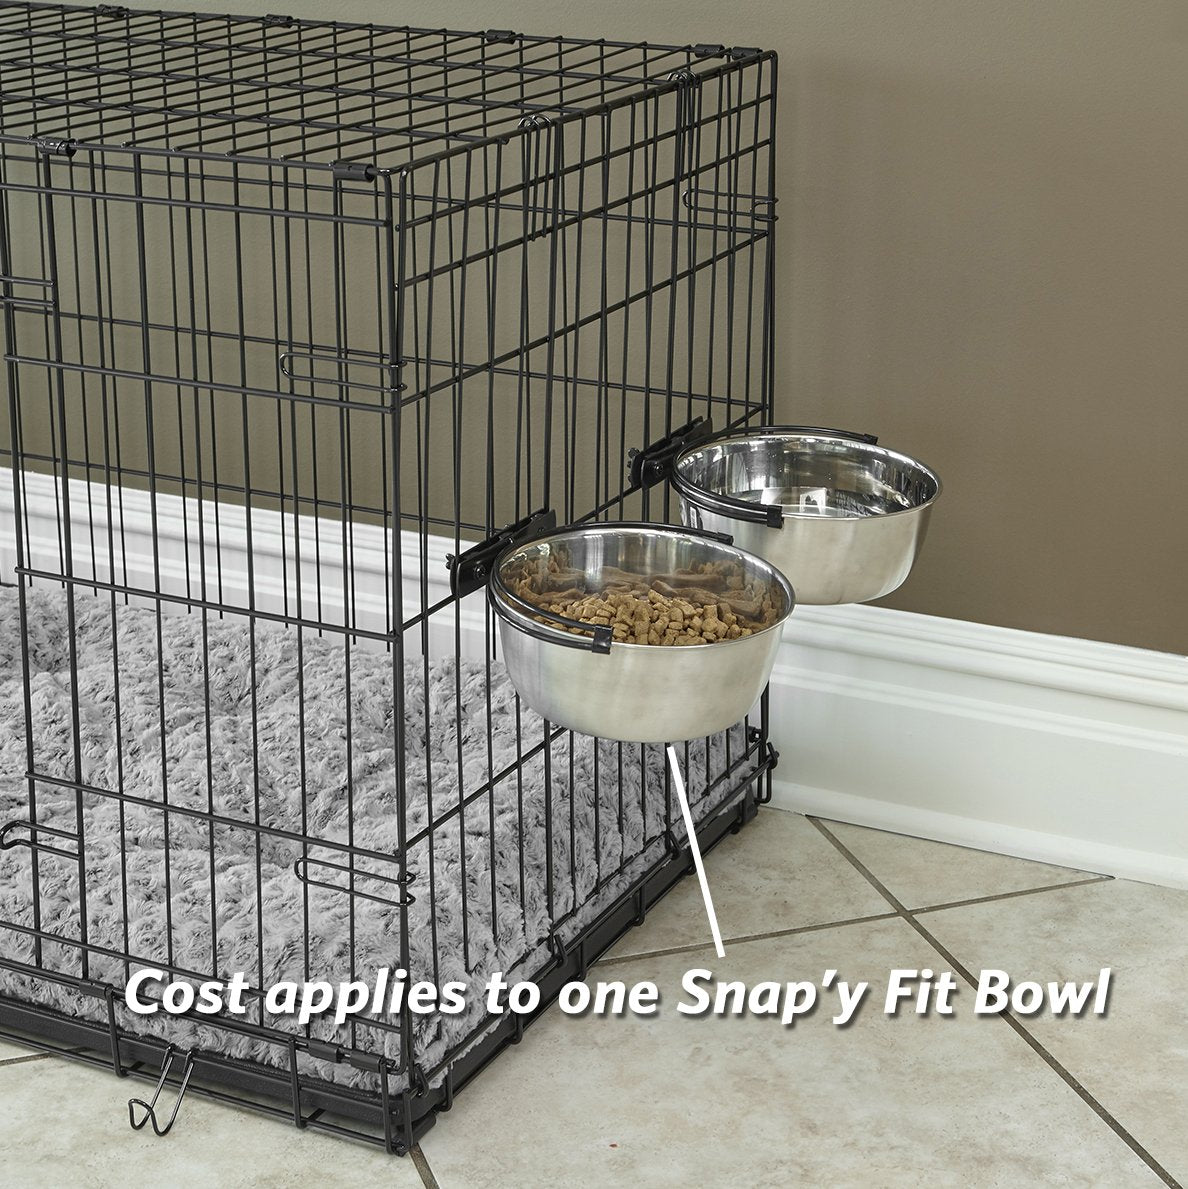 MidWest Homes for Pets Snap'y Fit Stainless Steel Food Bowl / Pet Bowl, 10 oz. for Dogs, Cats, Small Animals, Silver, 10 Ounces (1.25 cups)